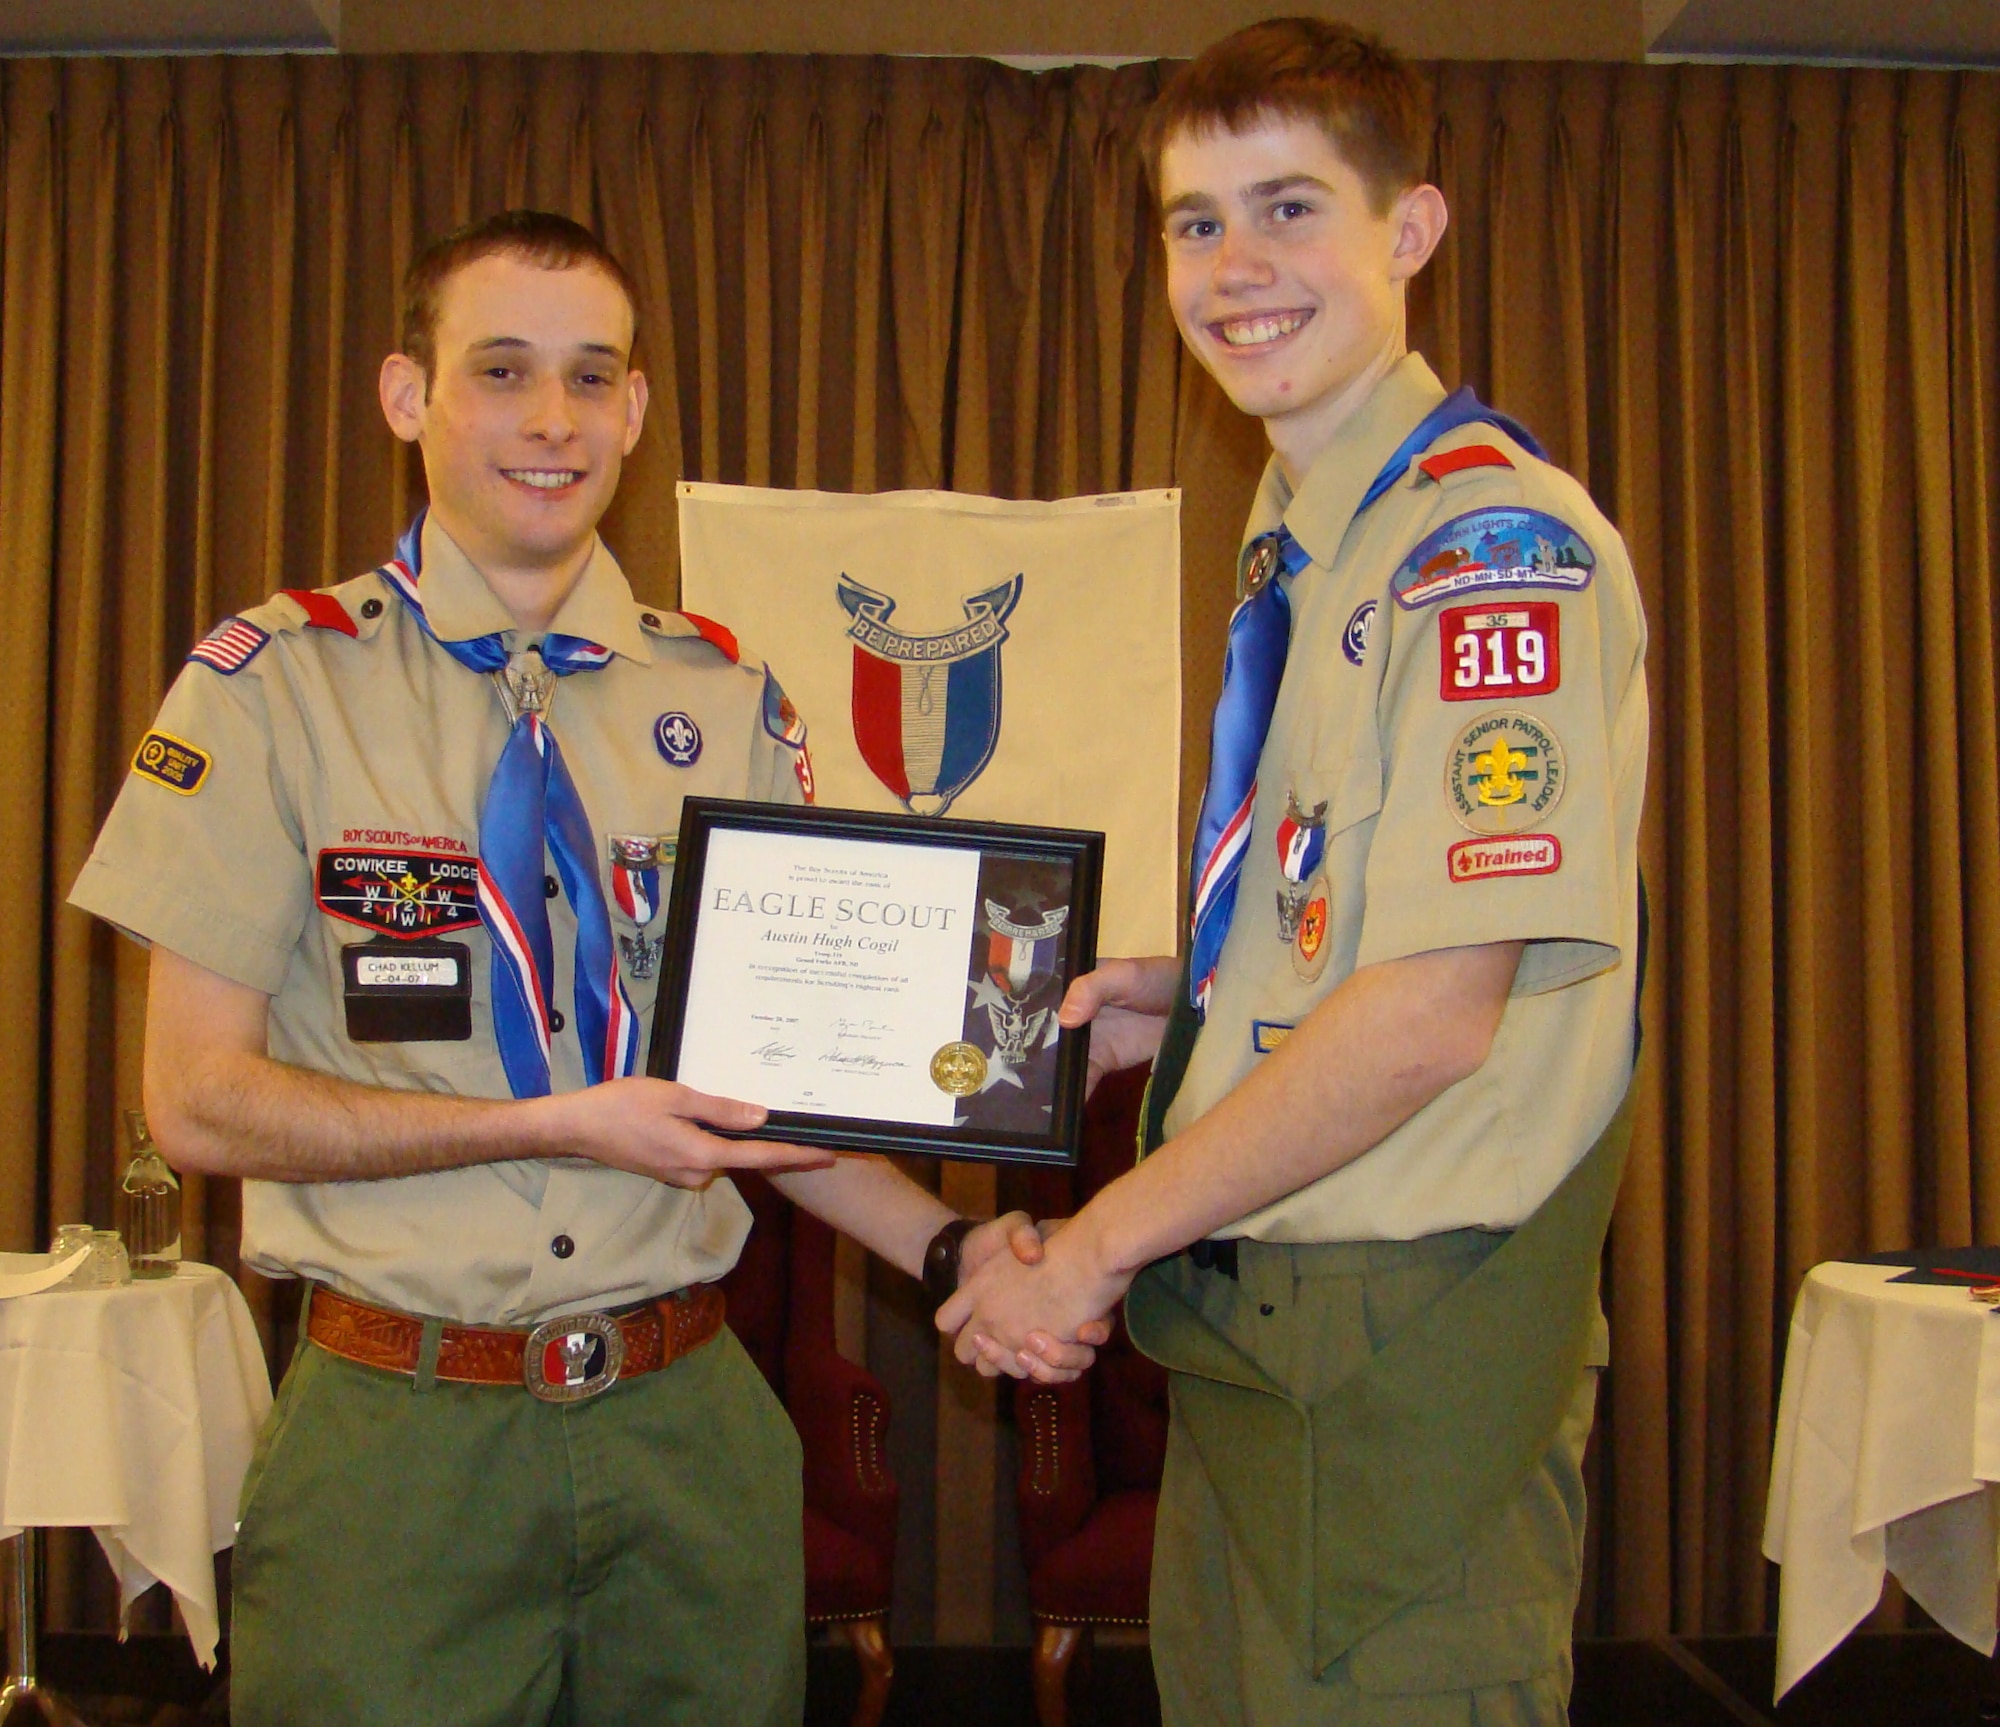 GRAND FORKS AIR FORCE BASE ND - Austin Cogil (right) receives a certificate recognizing his achievement of reaching the rank of Eagle Scout from Troop 319 Scout Master Senior Airmen Chad Kellum.